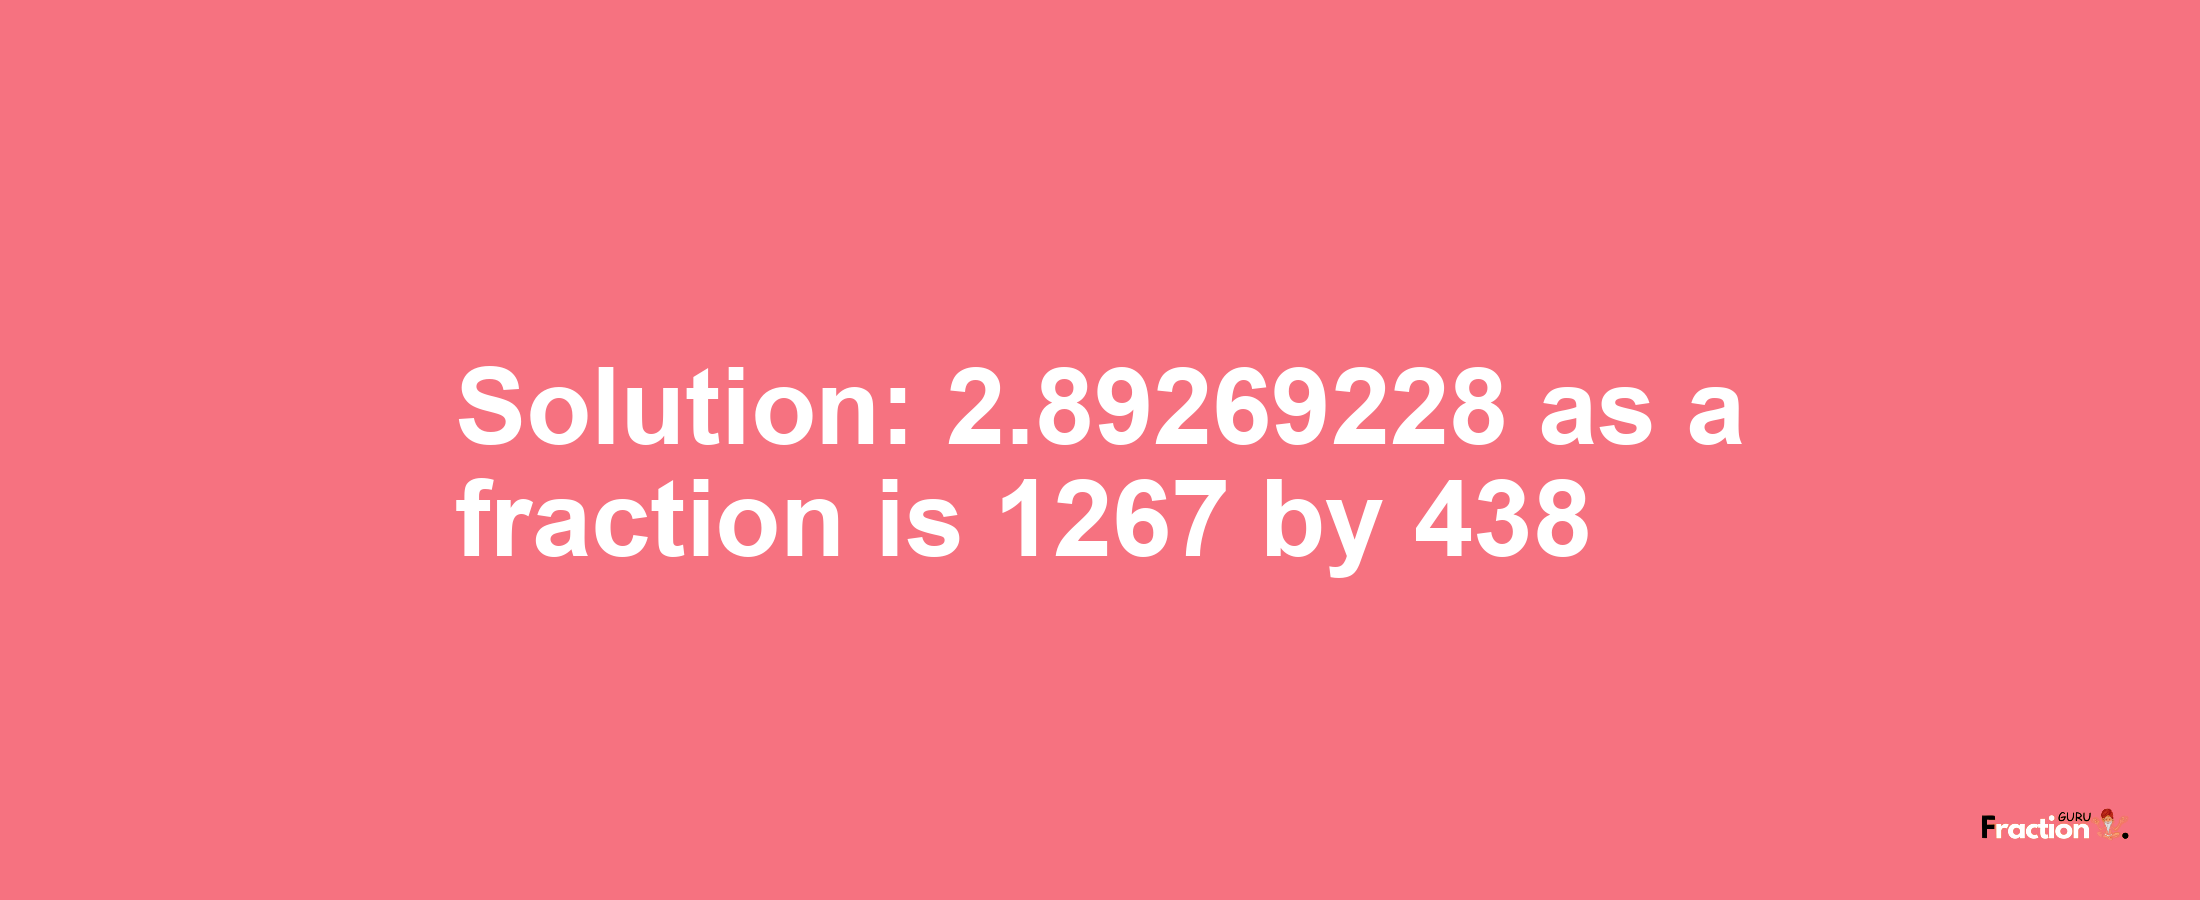 Solution:2.89269228 as a fraction is 1267/438